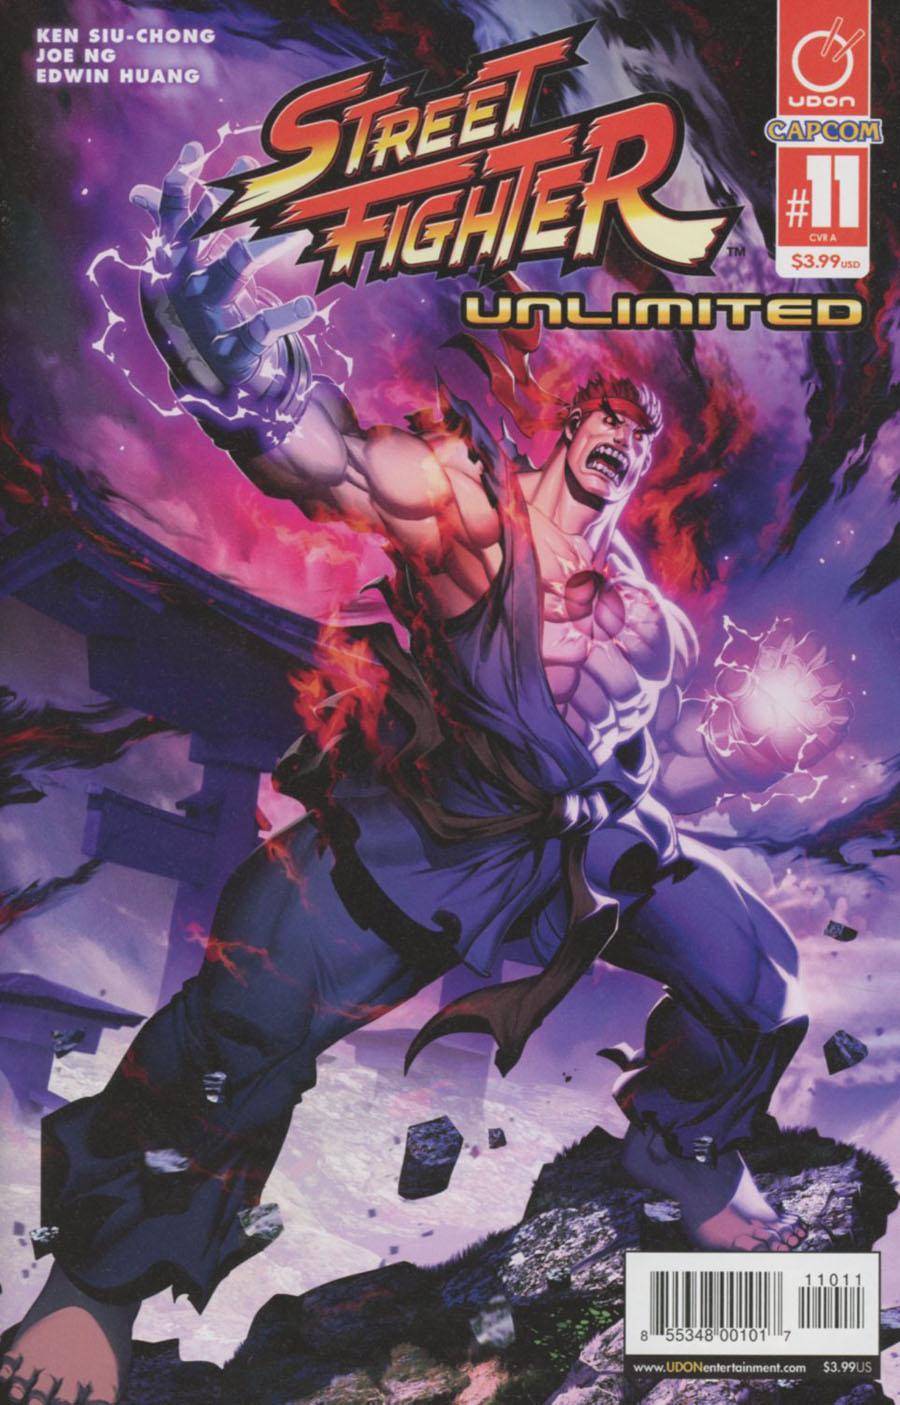 Street Fighter Unlimited Vol. 1 #11